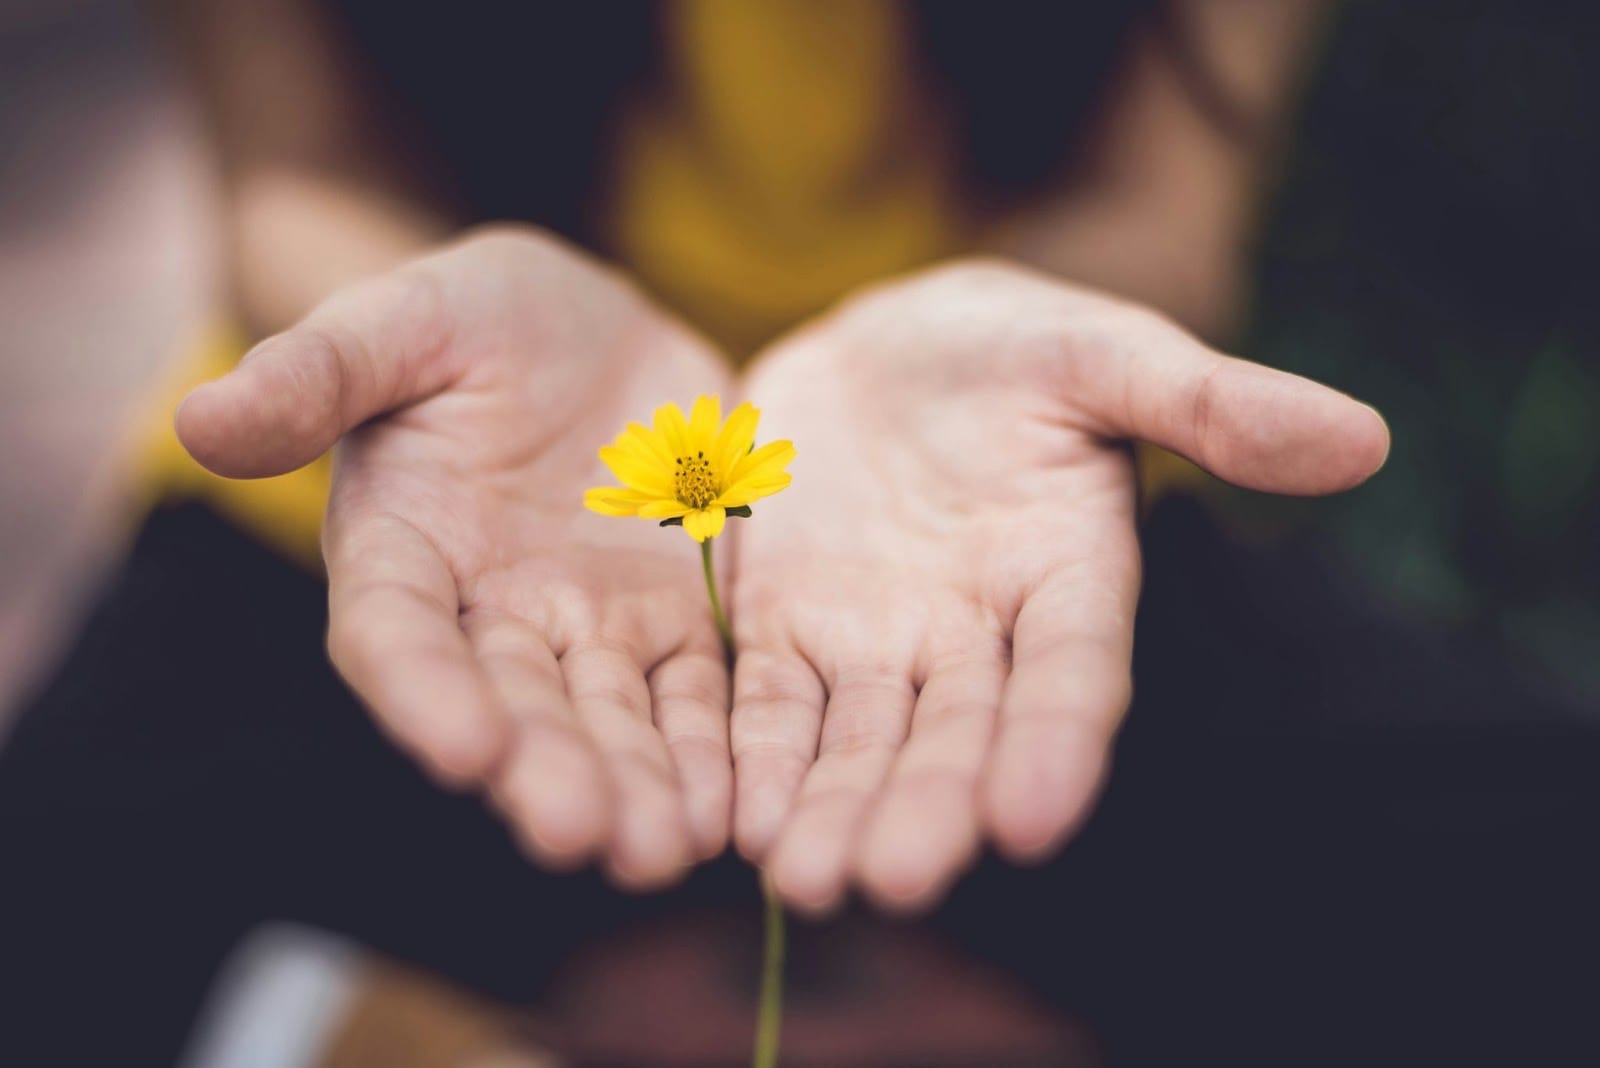 open hands holding a single yellow flower